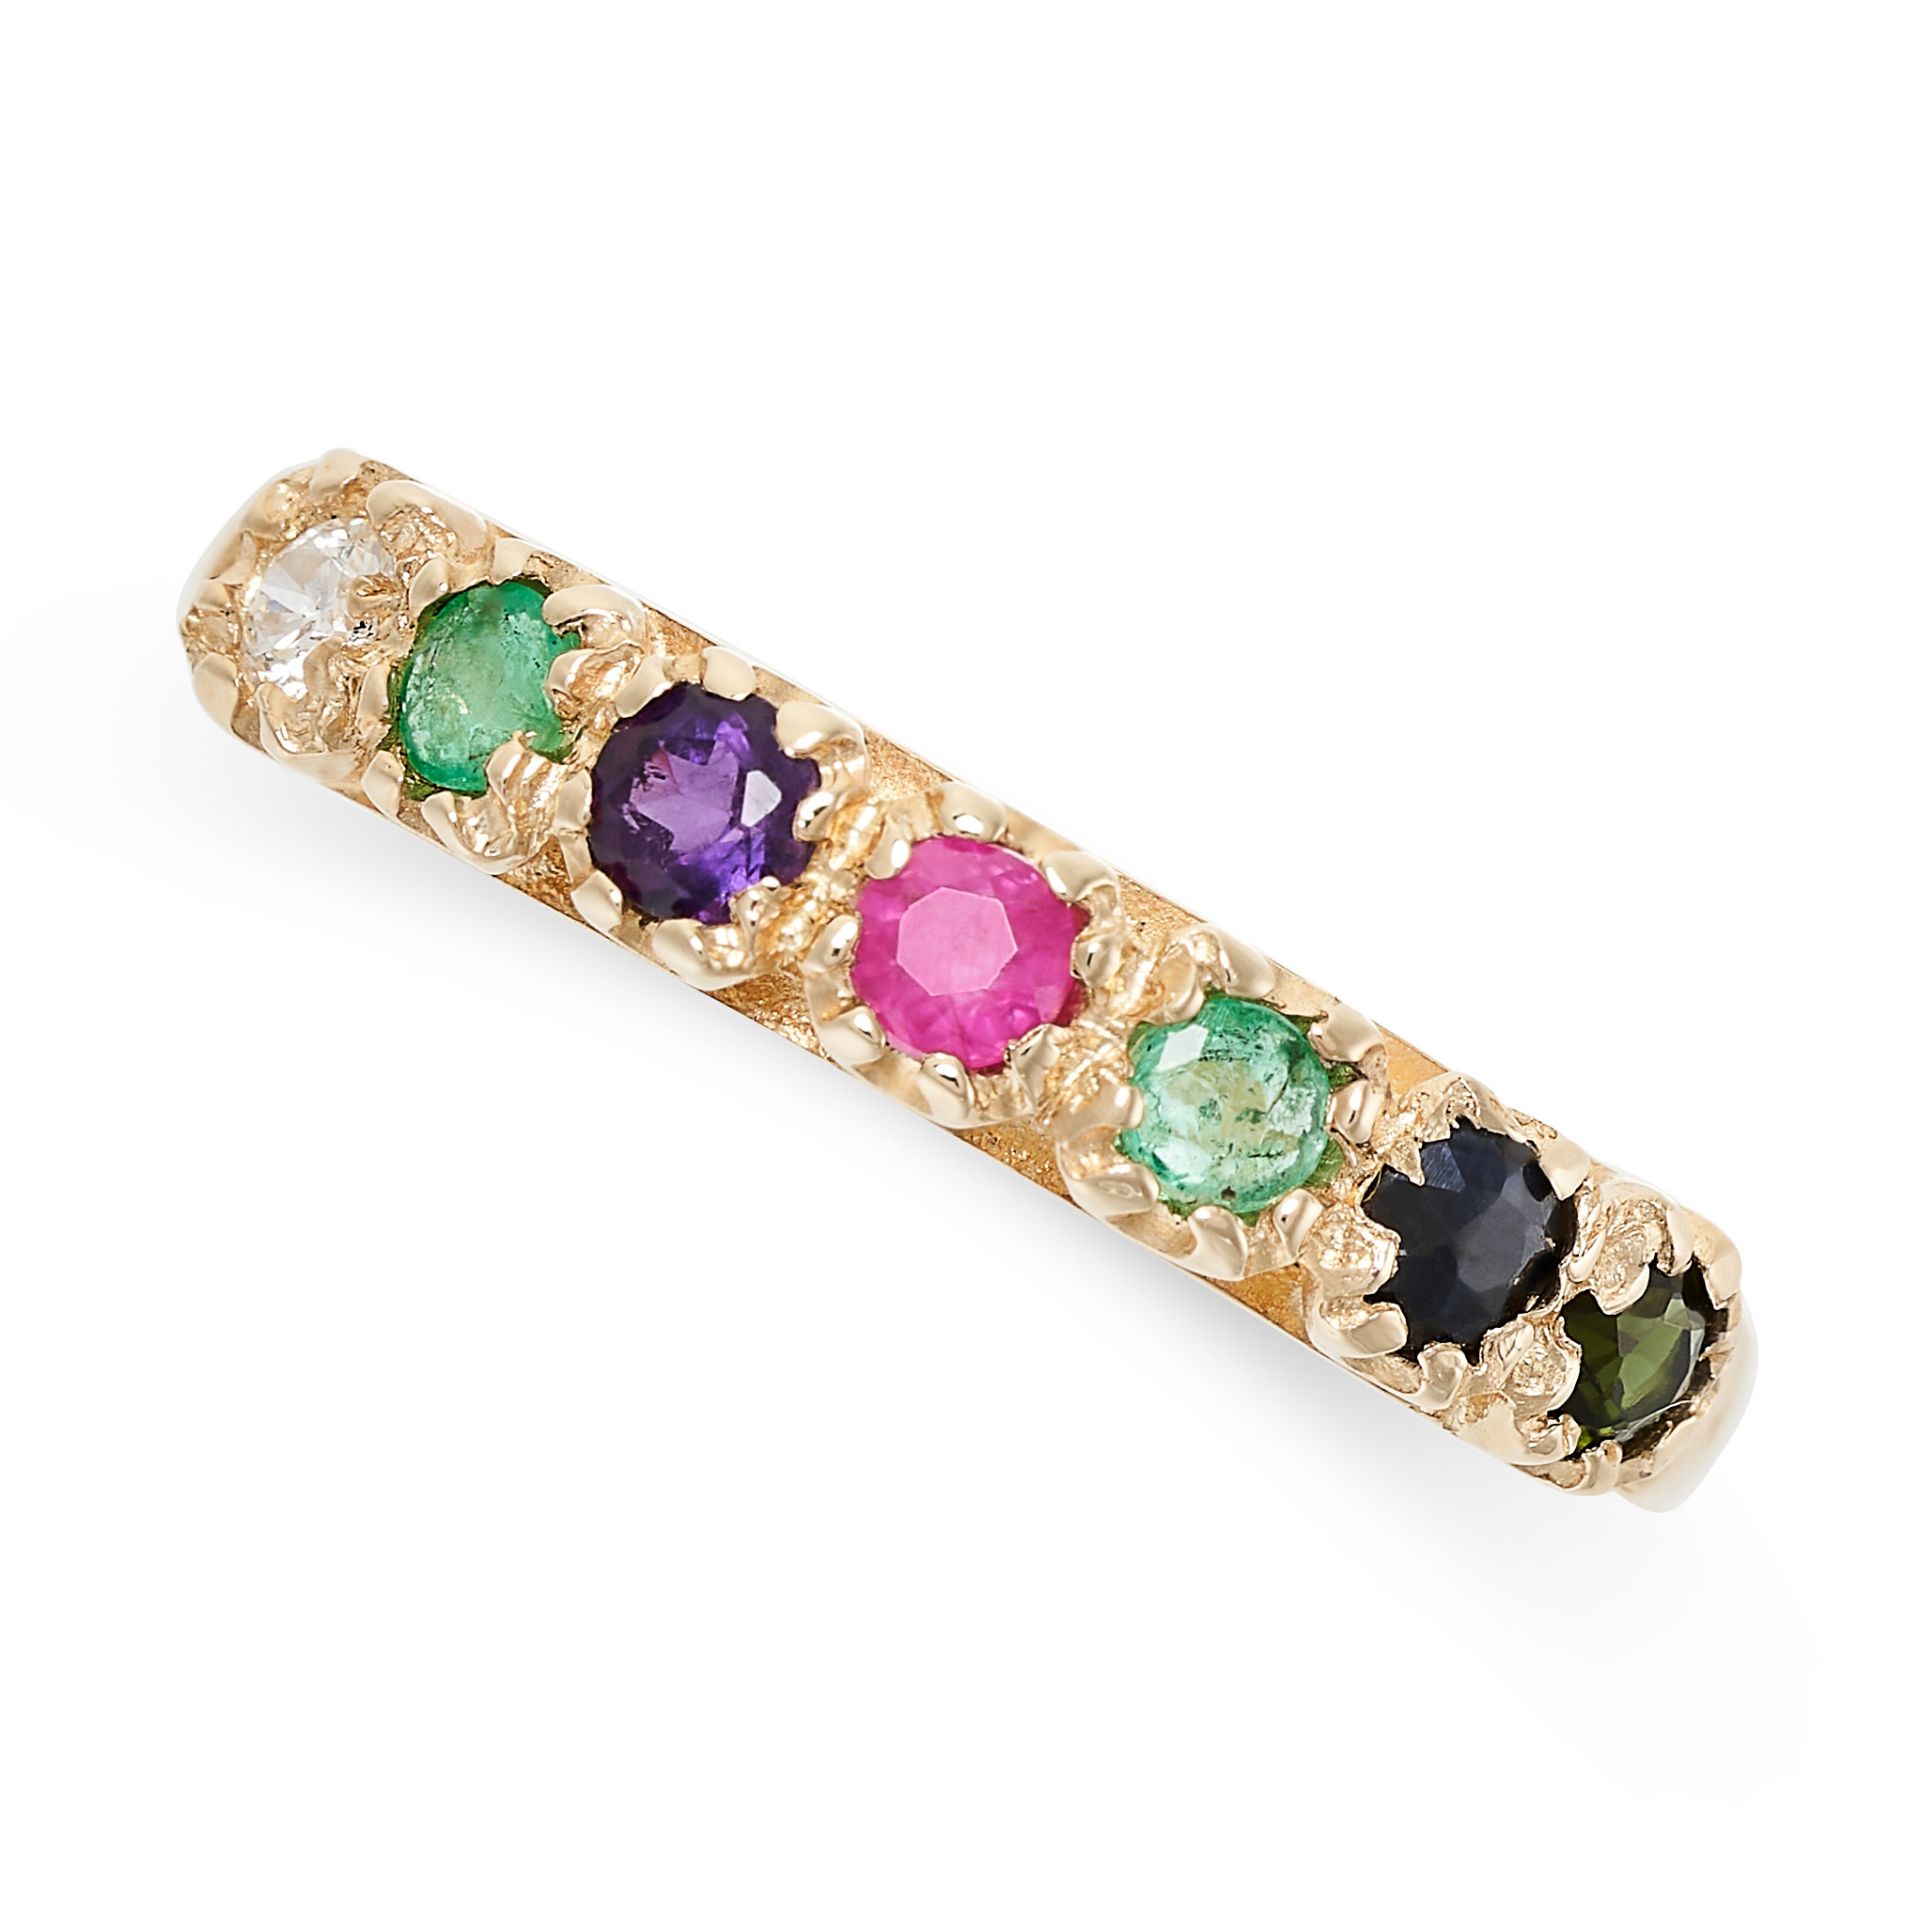 AN GEMSET DEAREST RING in 9ct gold, set with a row of round cut diamond, emerald, amethyst, ruby,